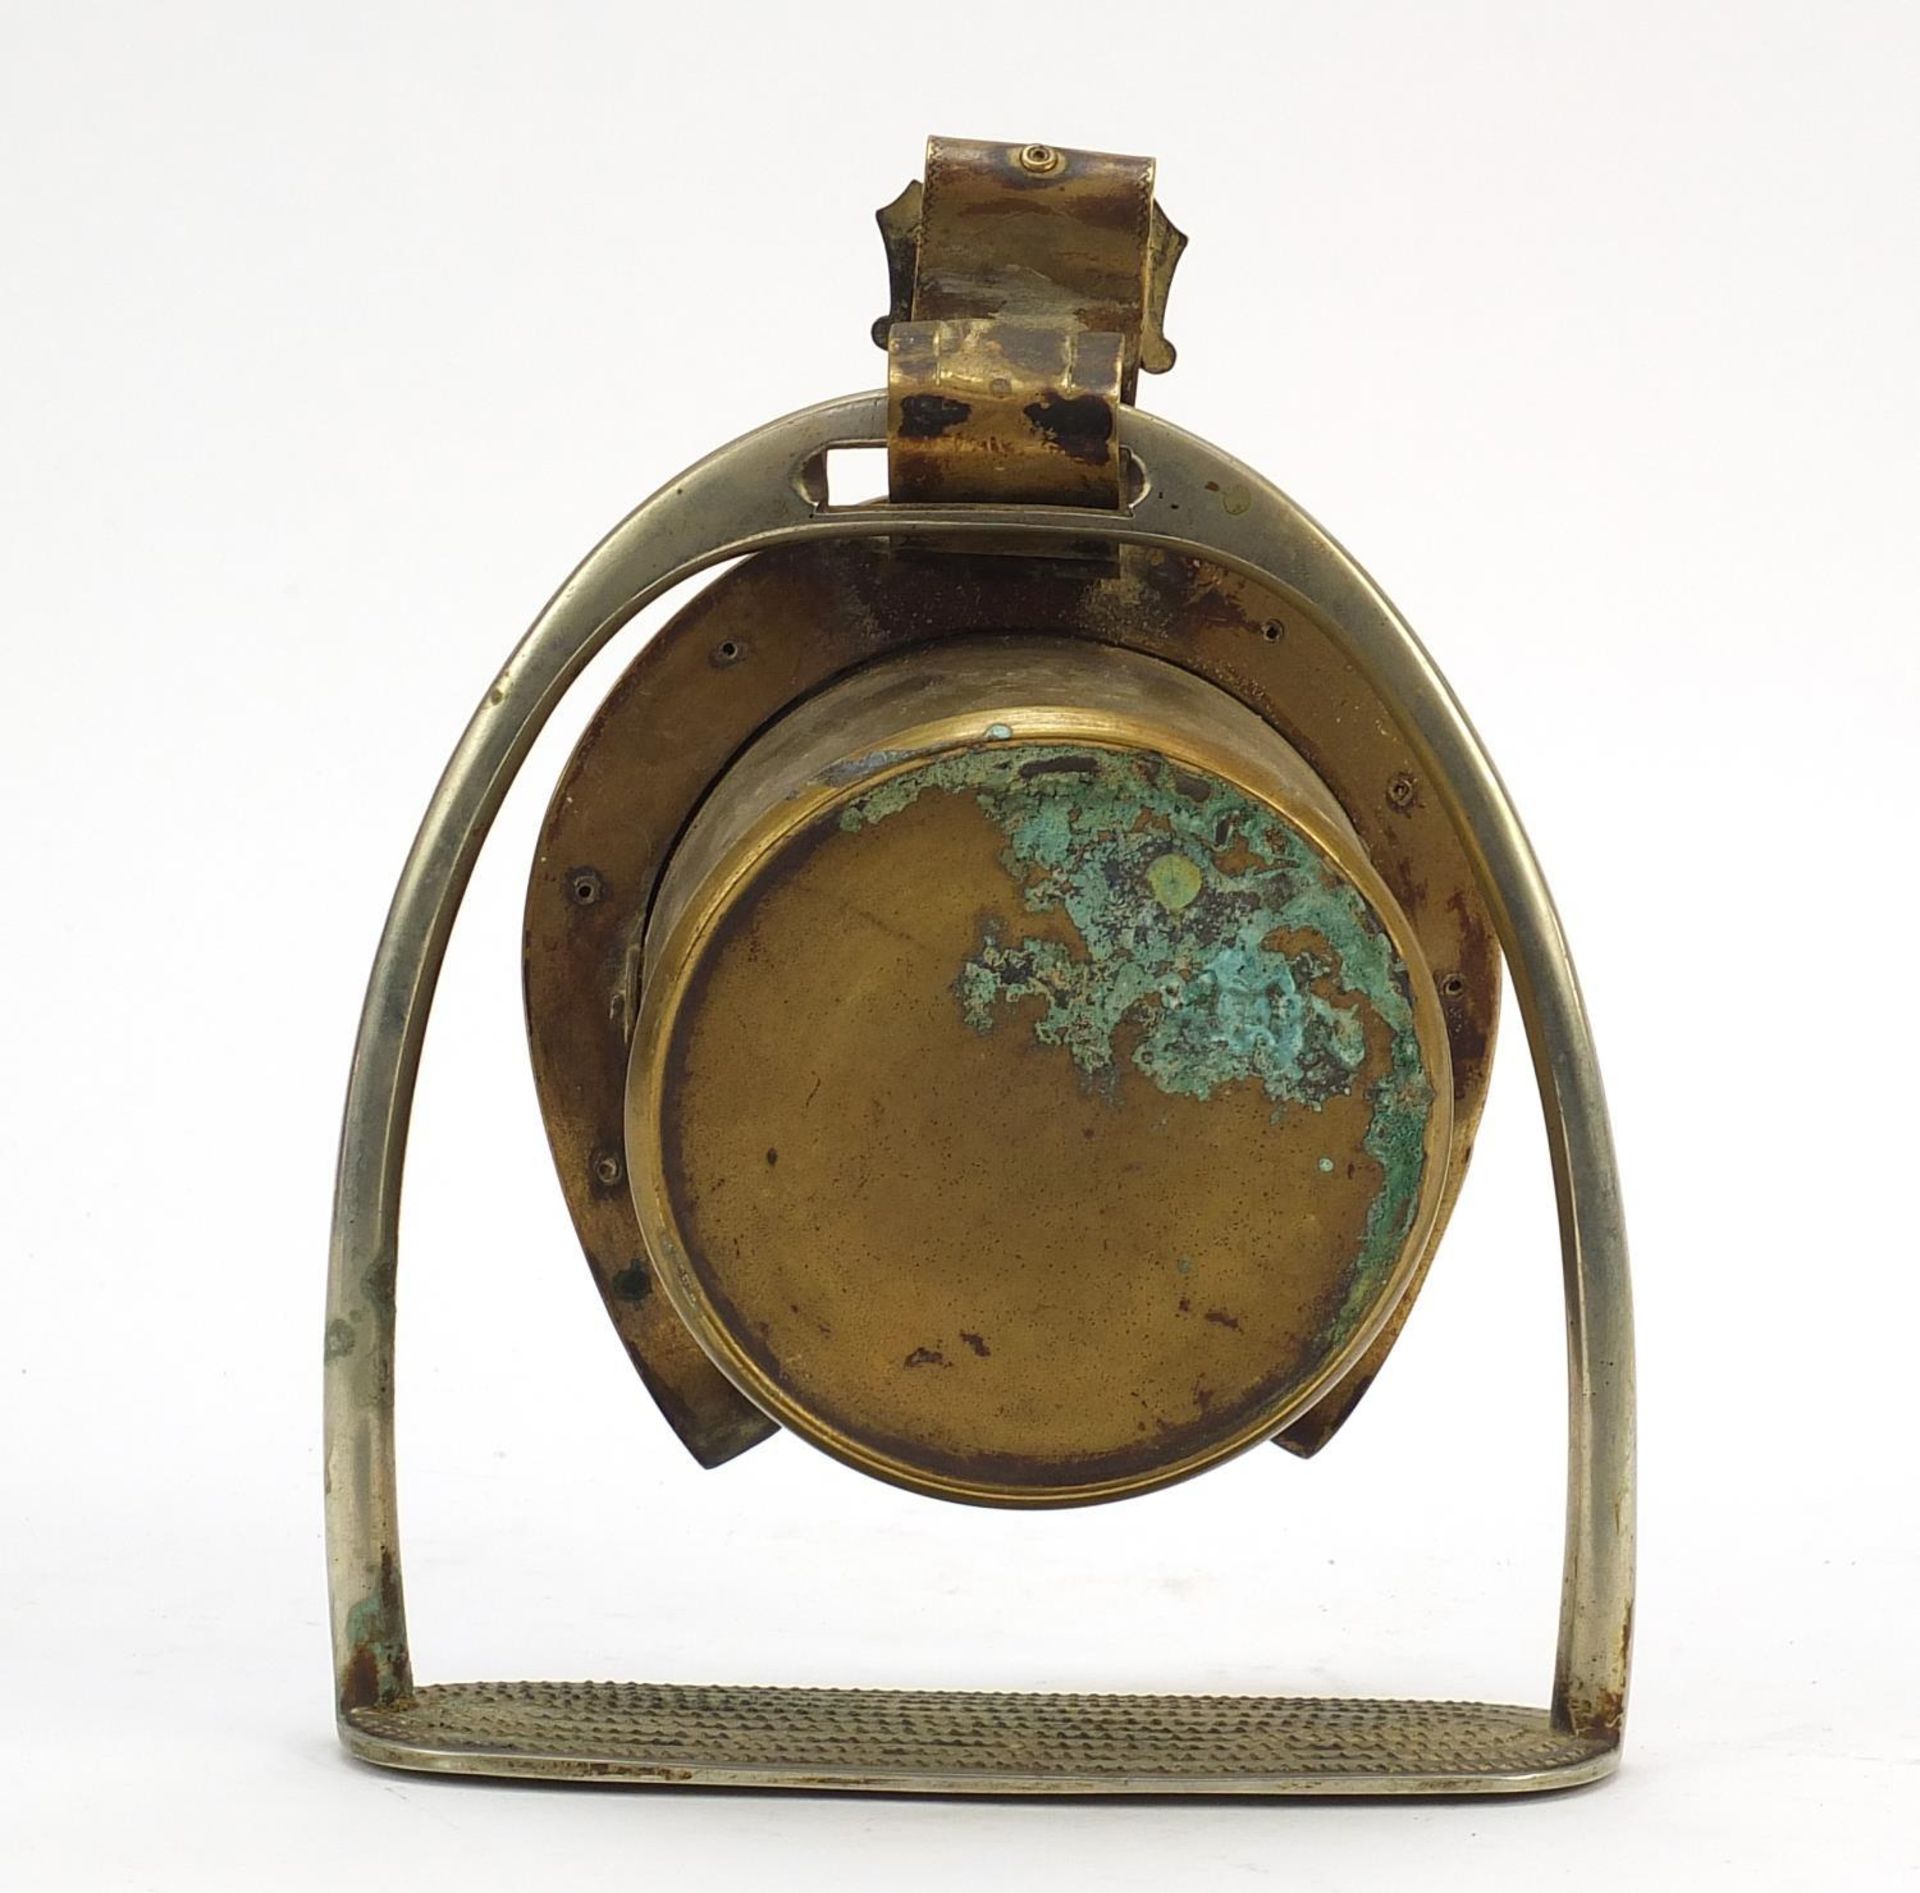 19th century horseshoe and stirrup design mantle clock with enamel dial having arabic numerals, 20cm - Image 3 of 4